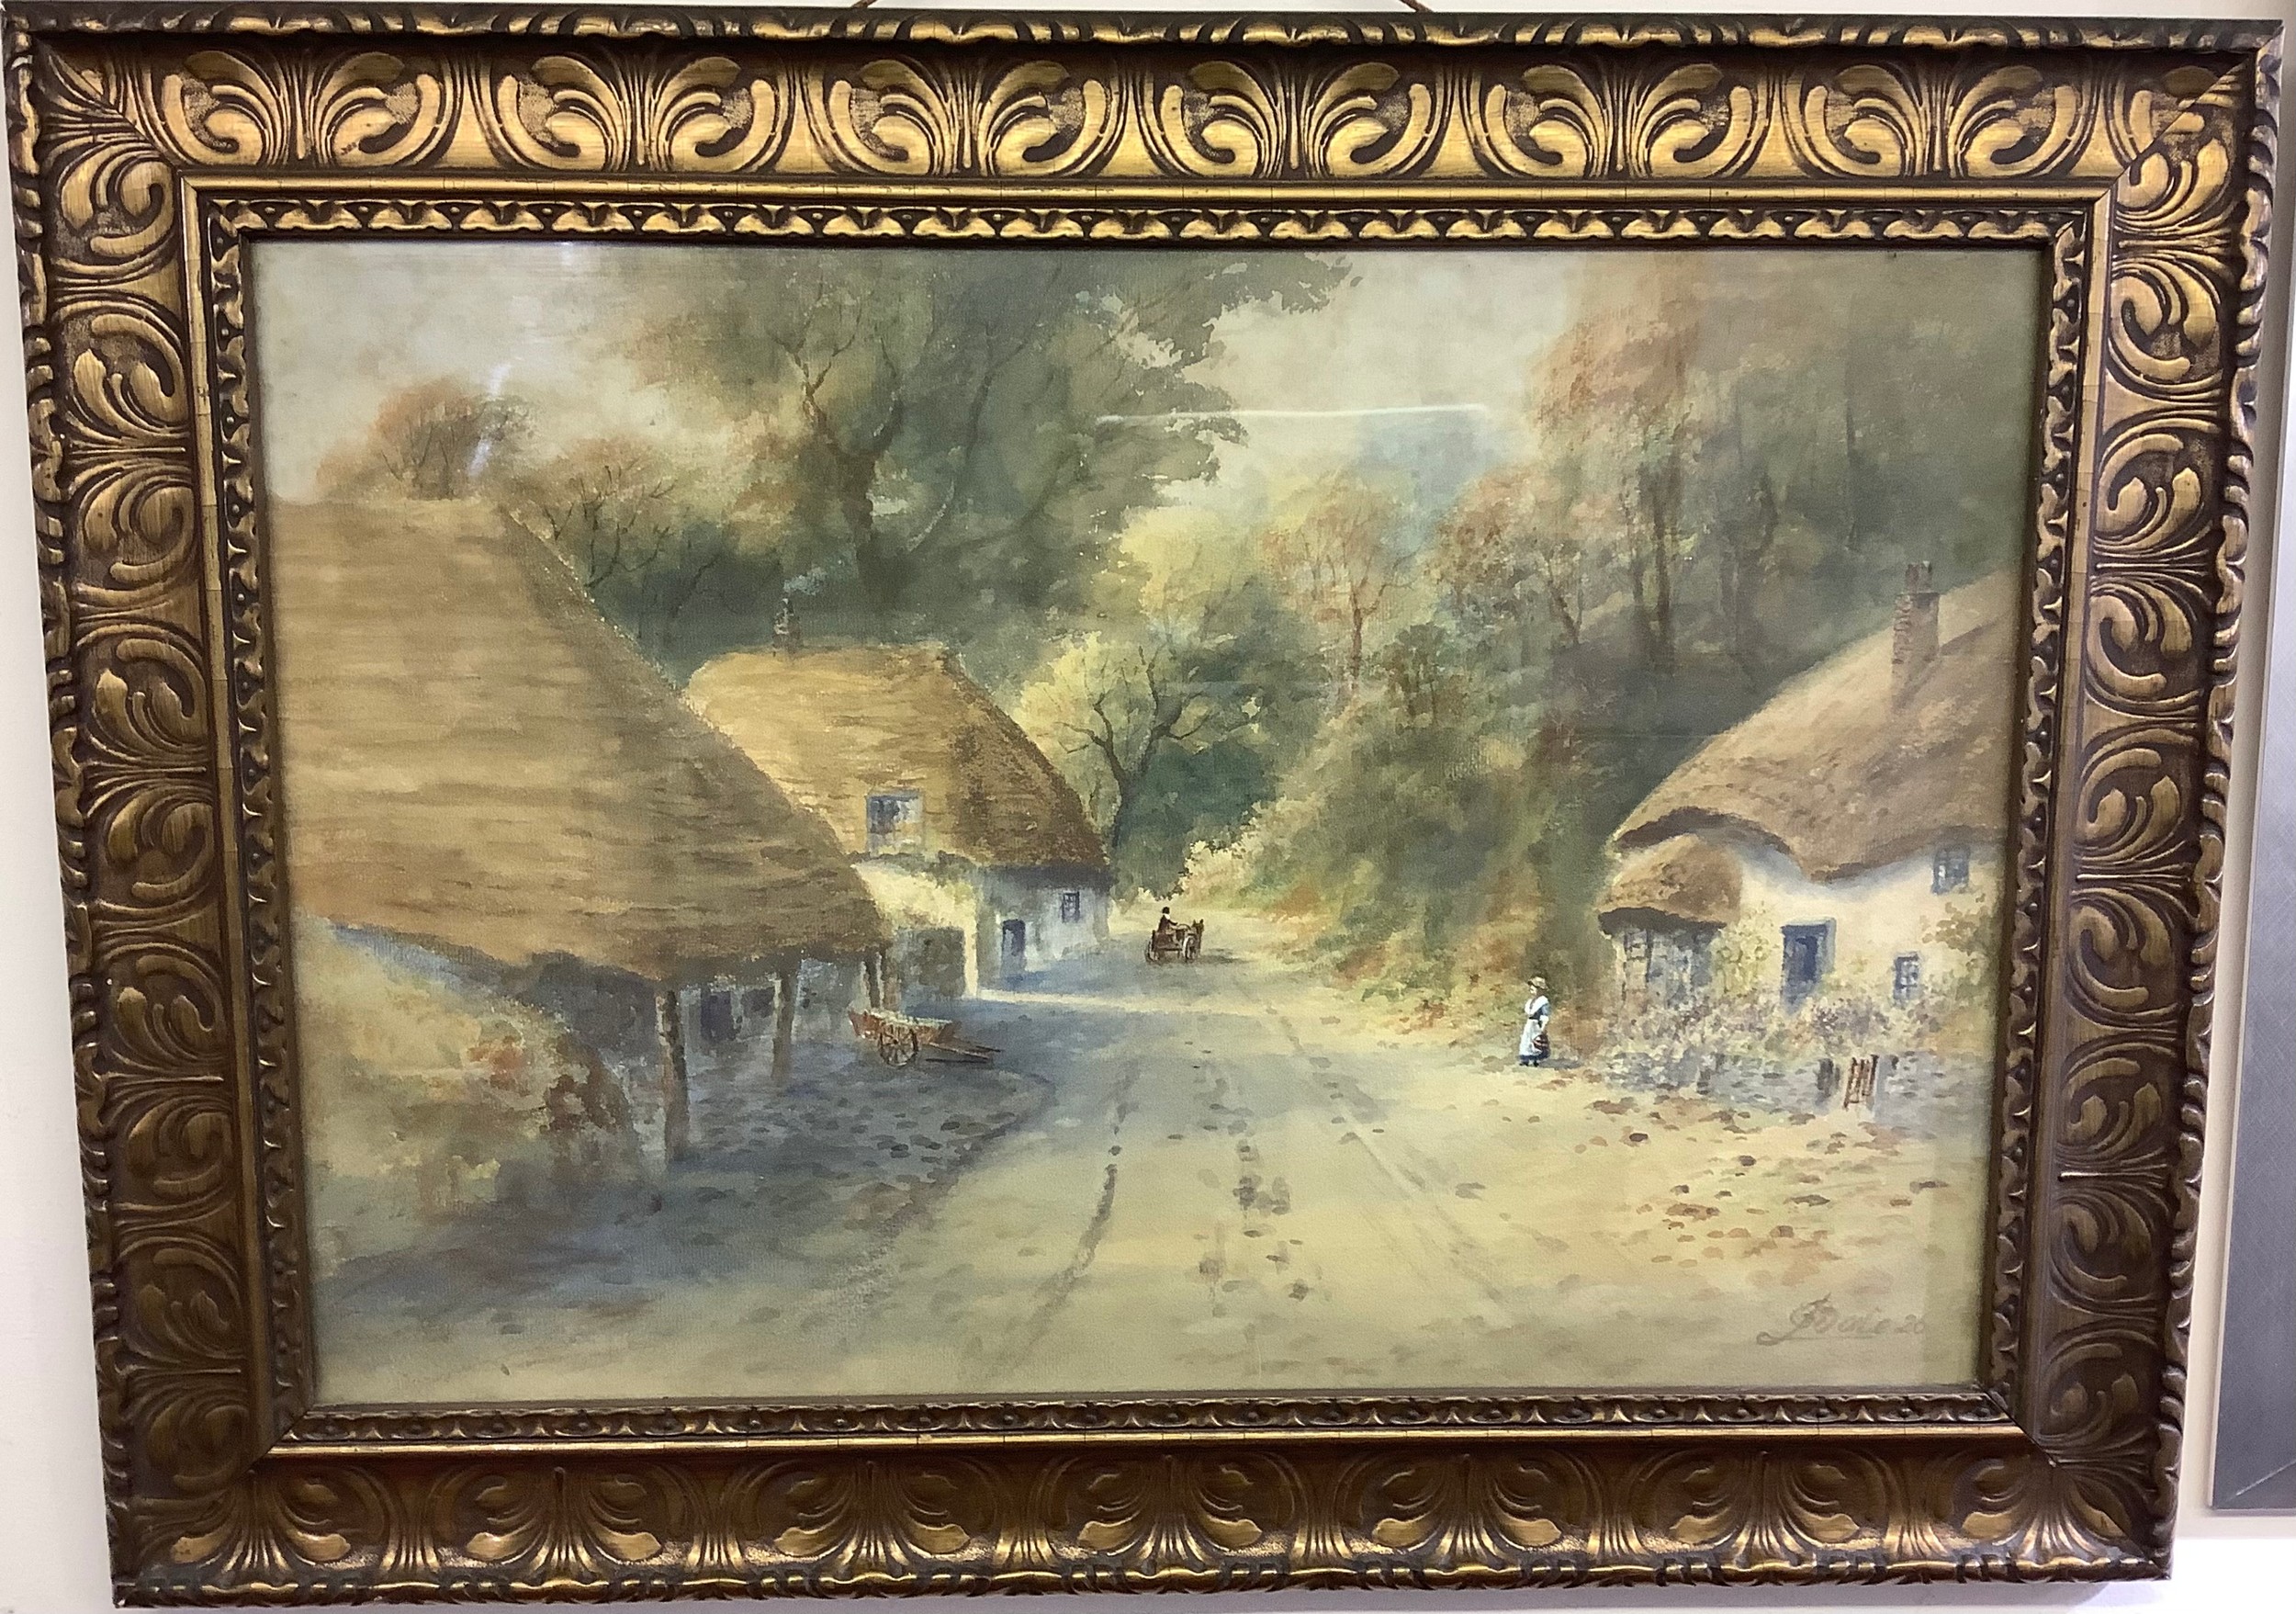 Dale, J, a rural country lane with thatched houses, figures and carts, watercolour, glazed and